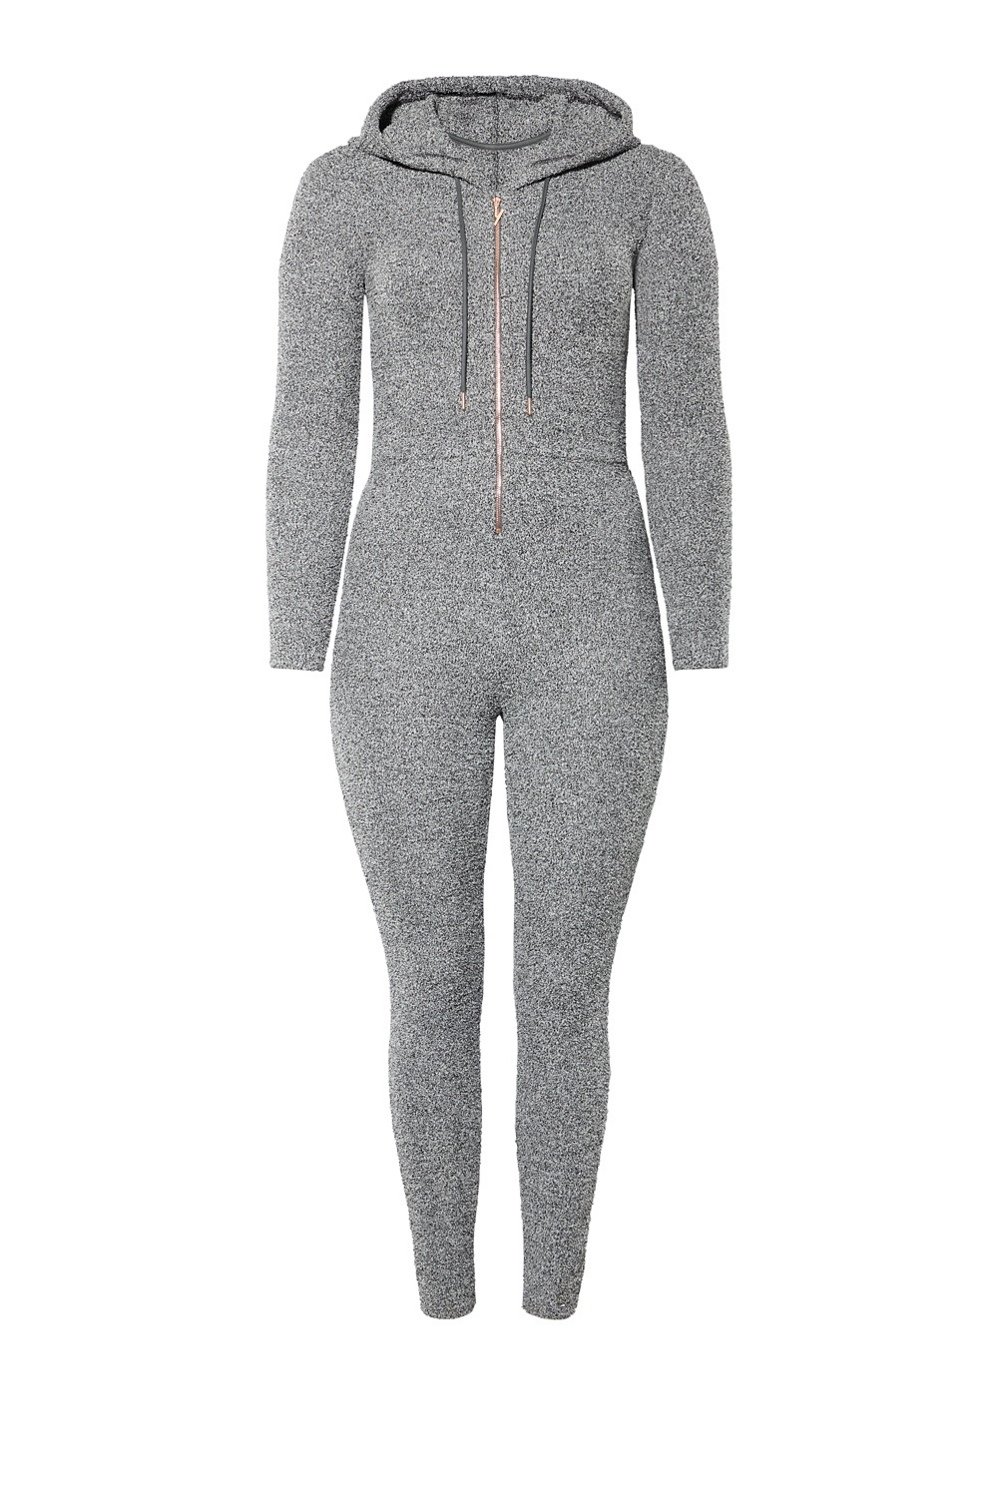 Soo excited to get my @yitty Pet Me Heart Pocket Onesie!! Just in time for  Thanksgiving!! I will definitely be comfy tomorrow! This is so